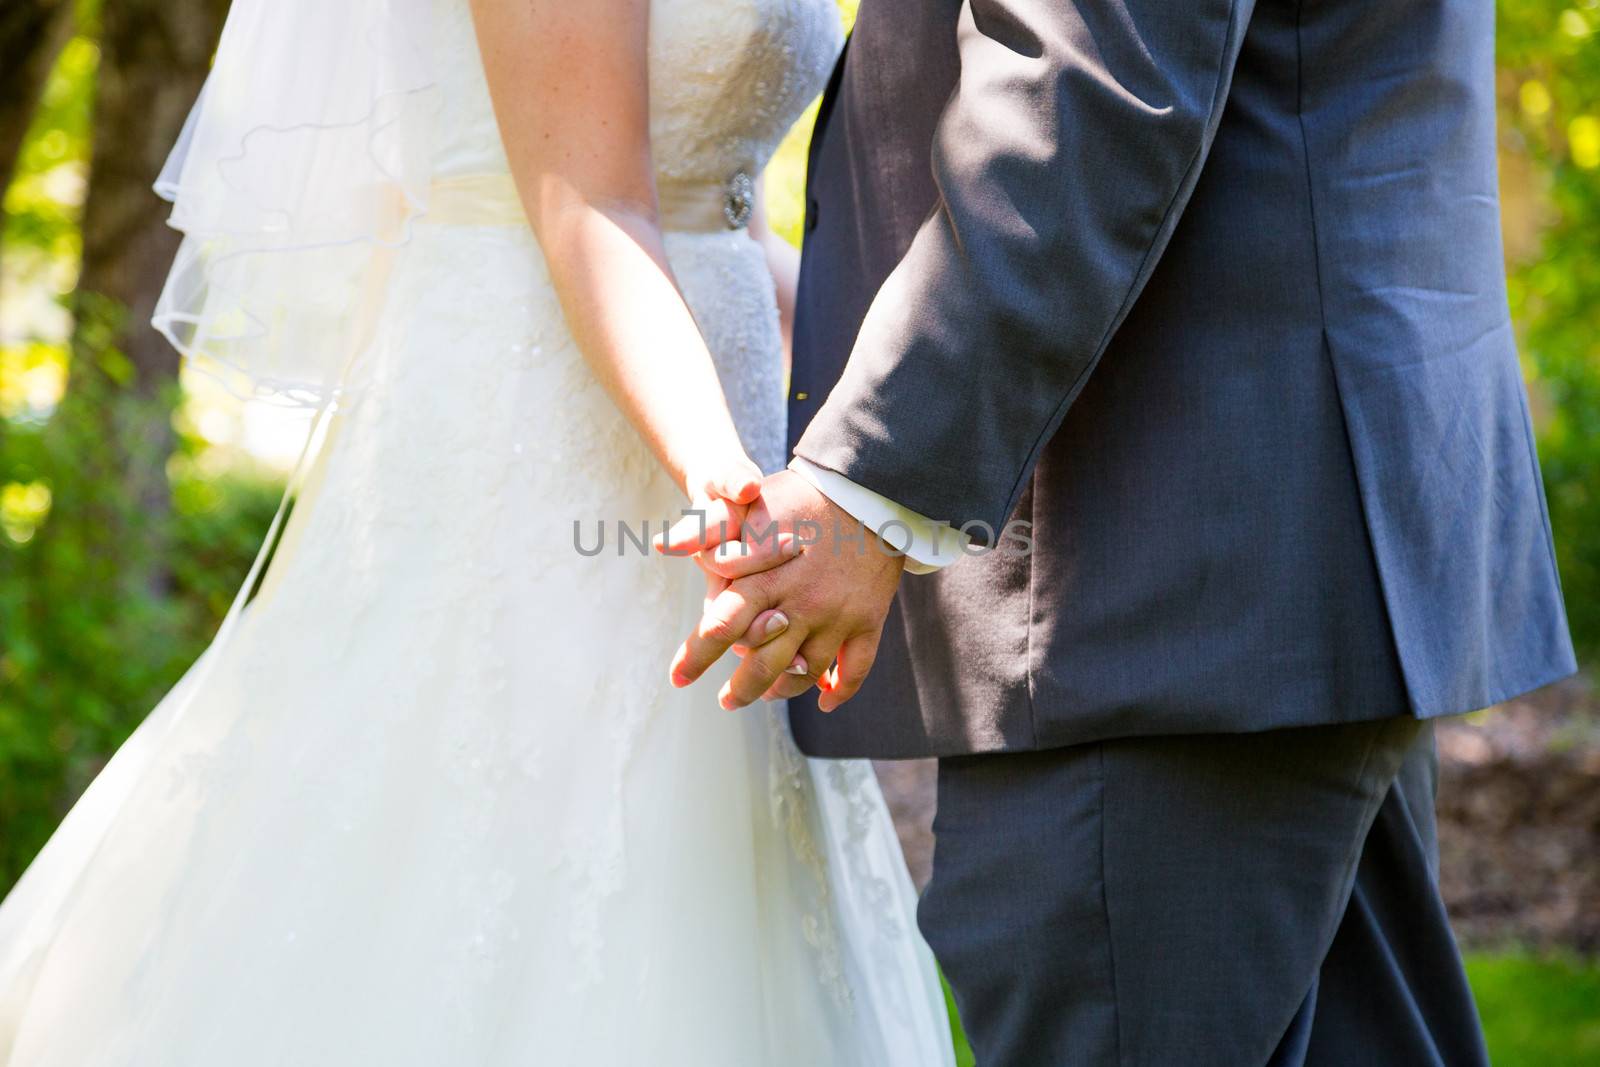 This bride and groom hold hands romantically while kissing on their wedding day.